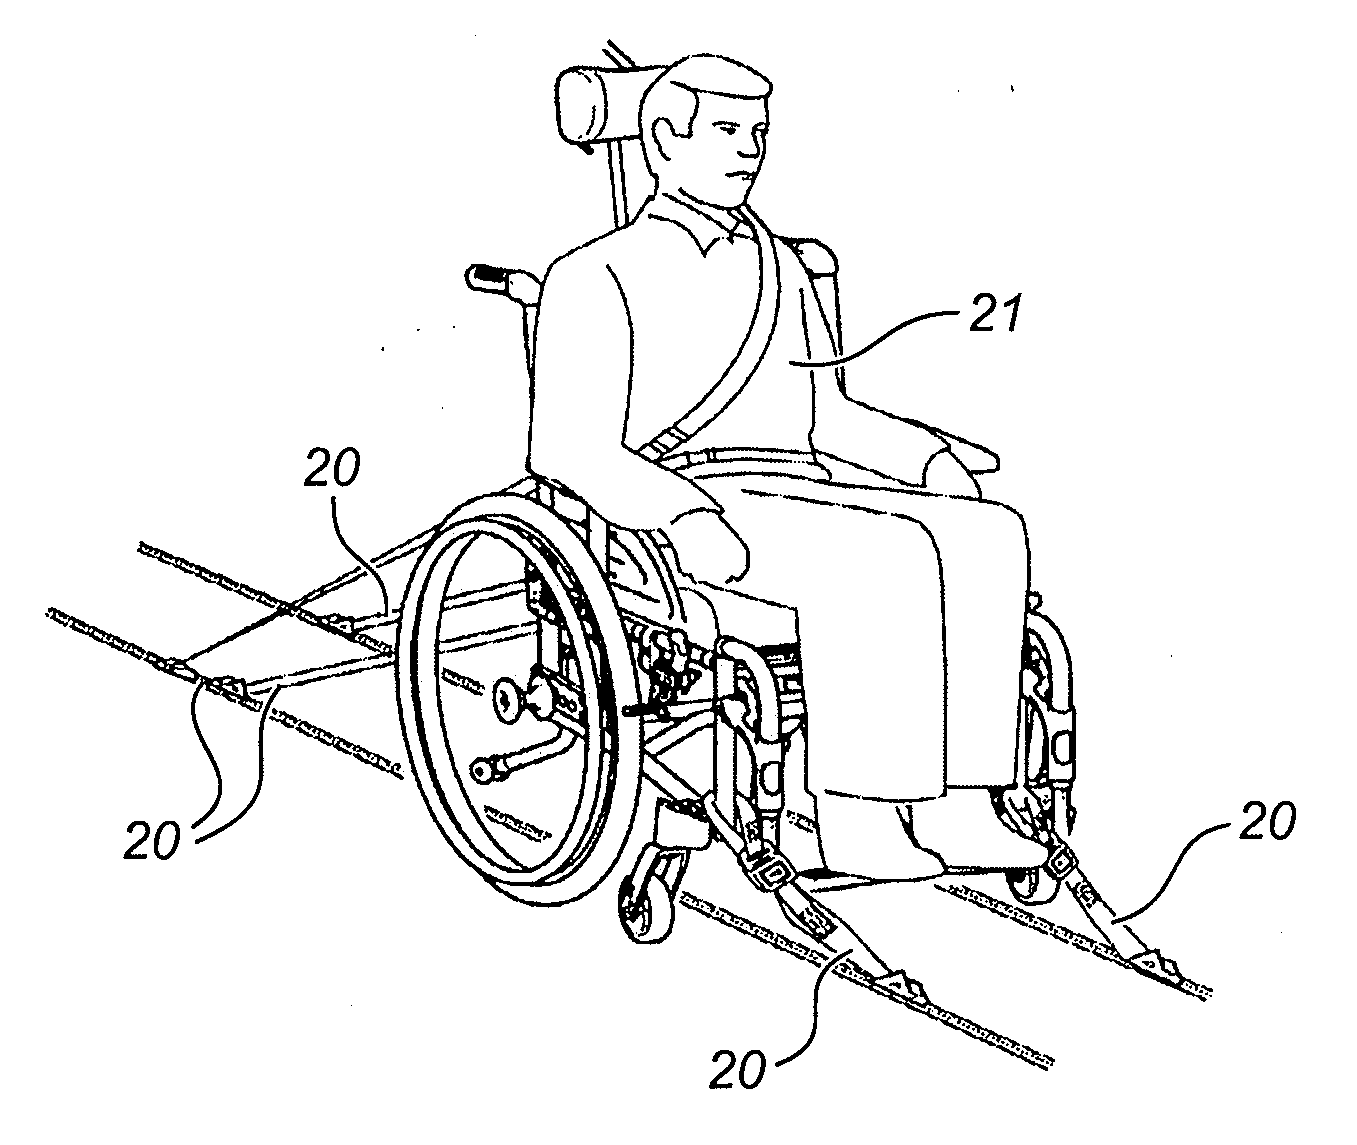 Methods for ensuring the safety of a wheelchair passenger in a transport vehicle